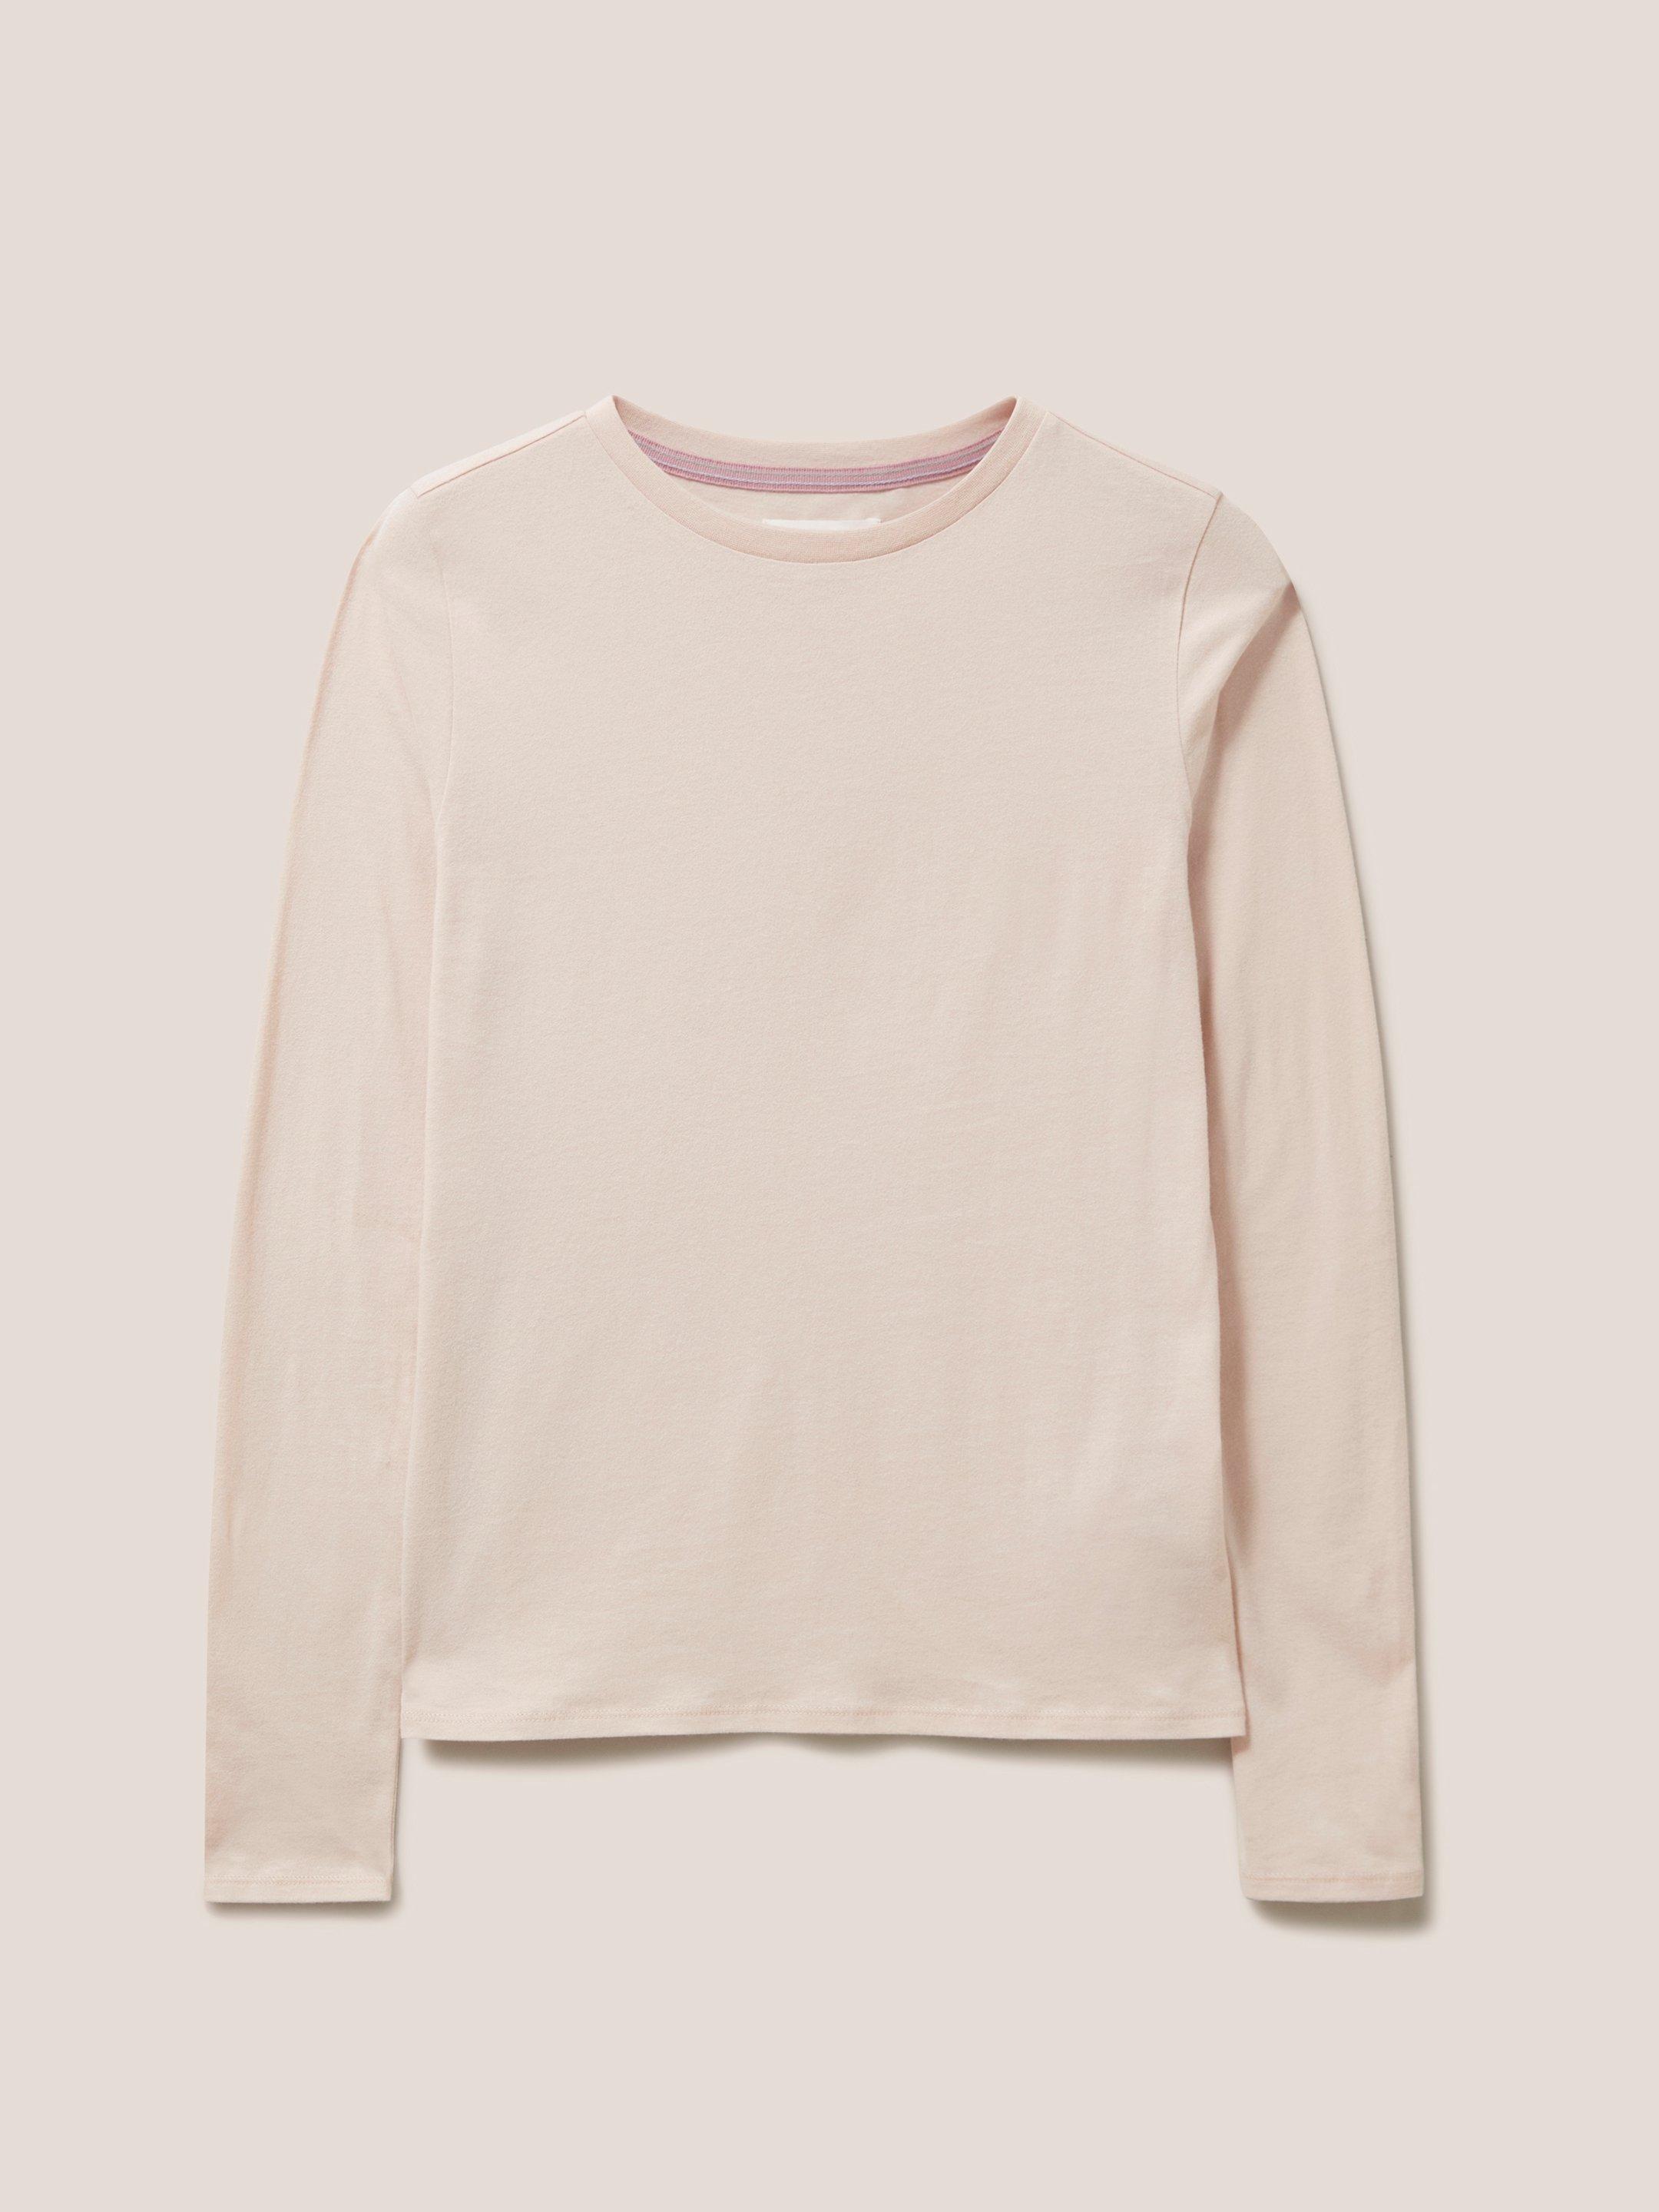 Camile Tee in LGT PINK - FLAT FRONT